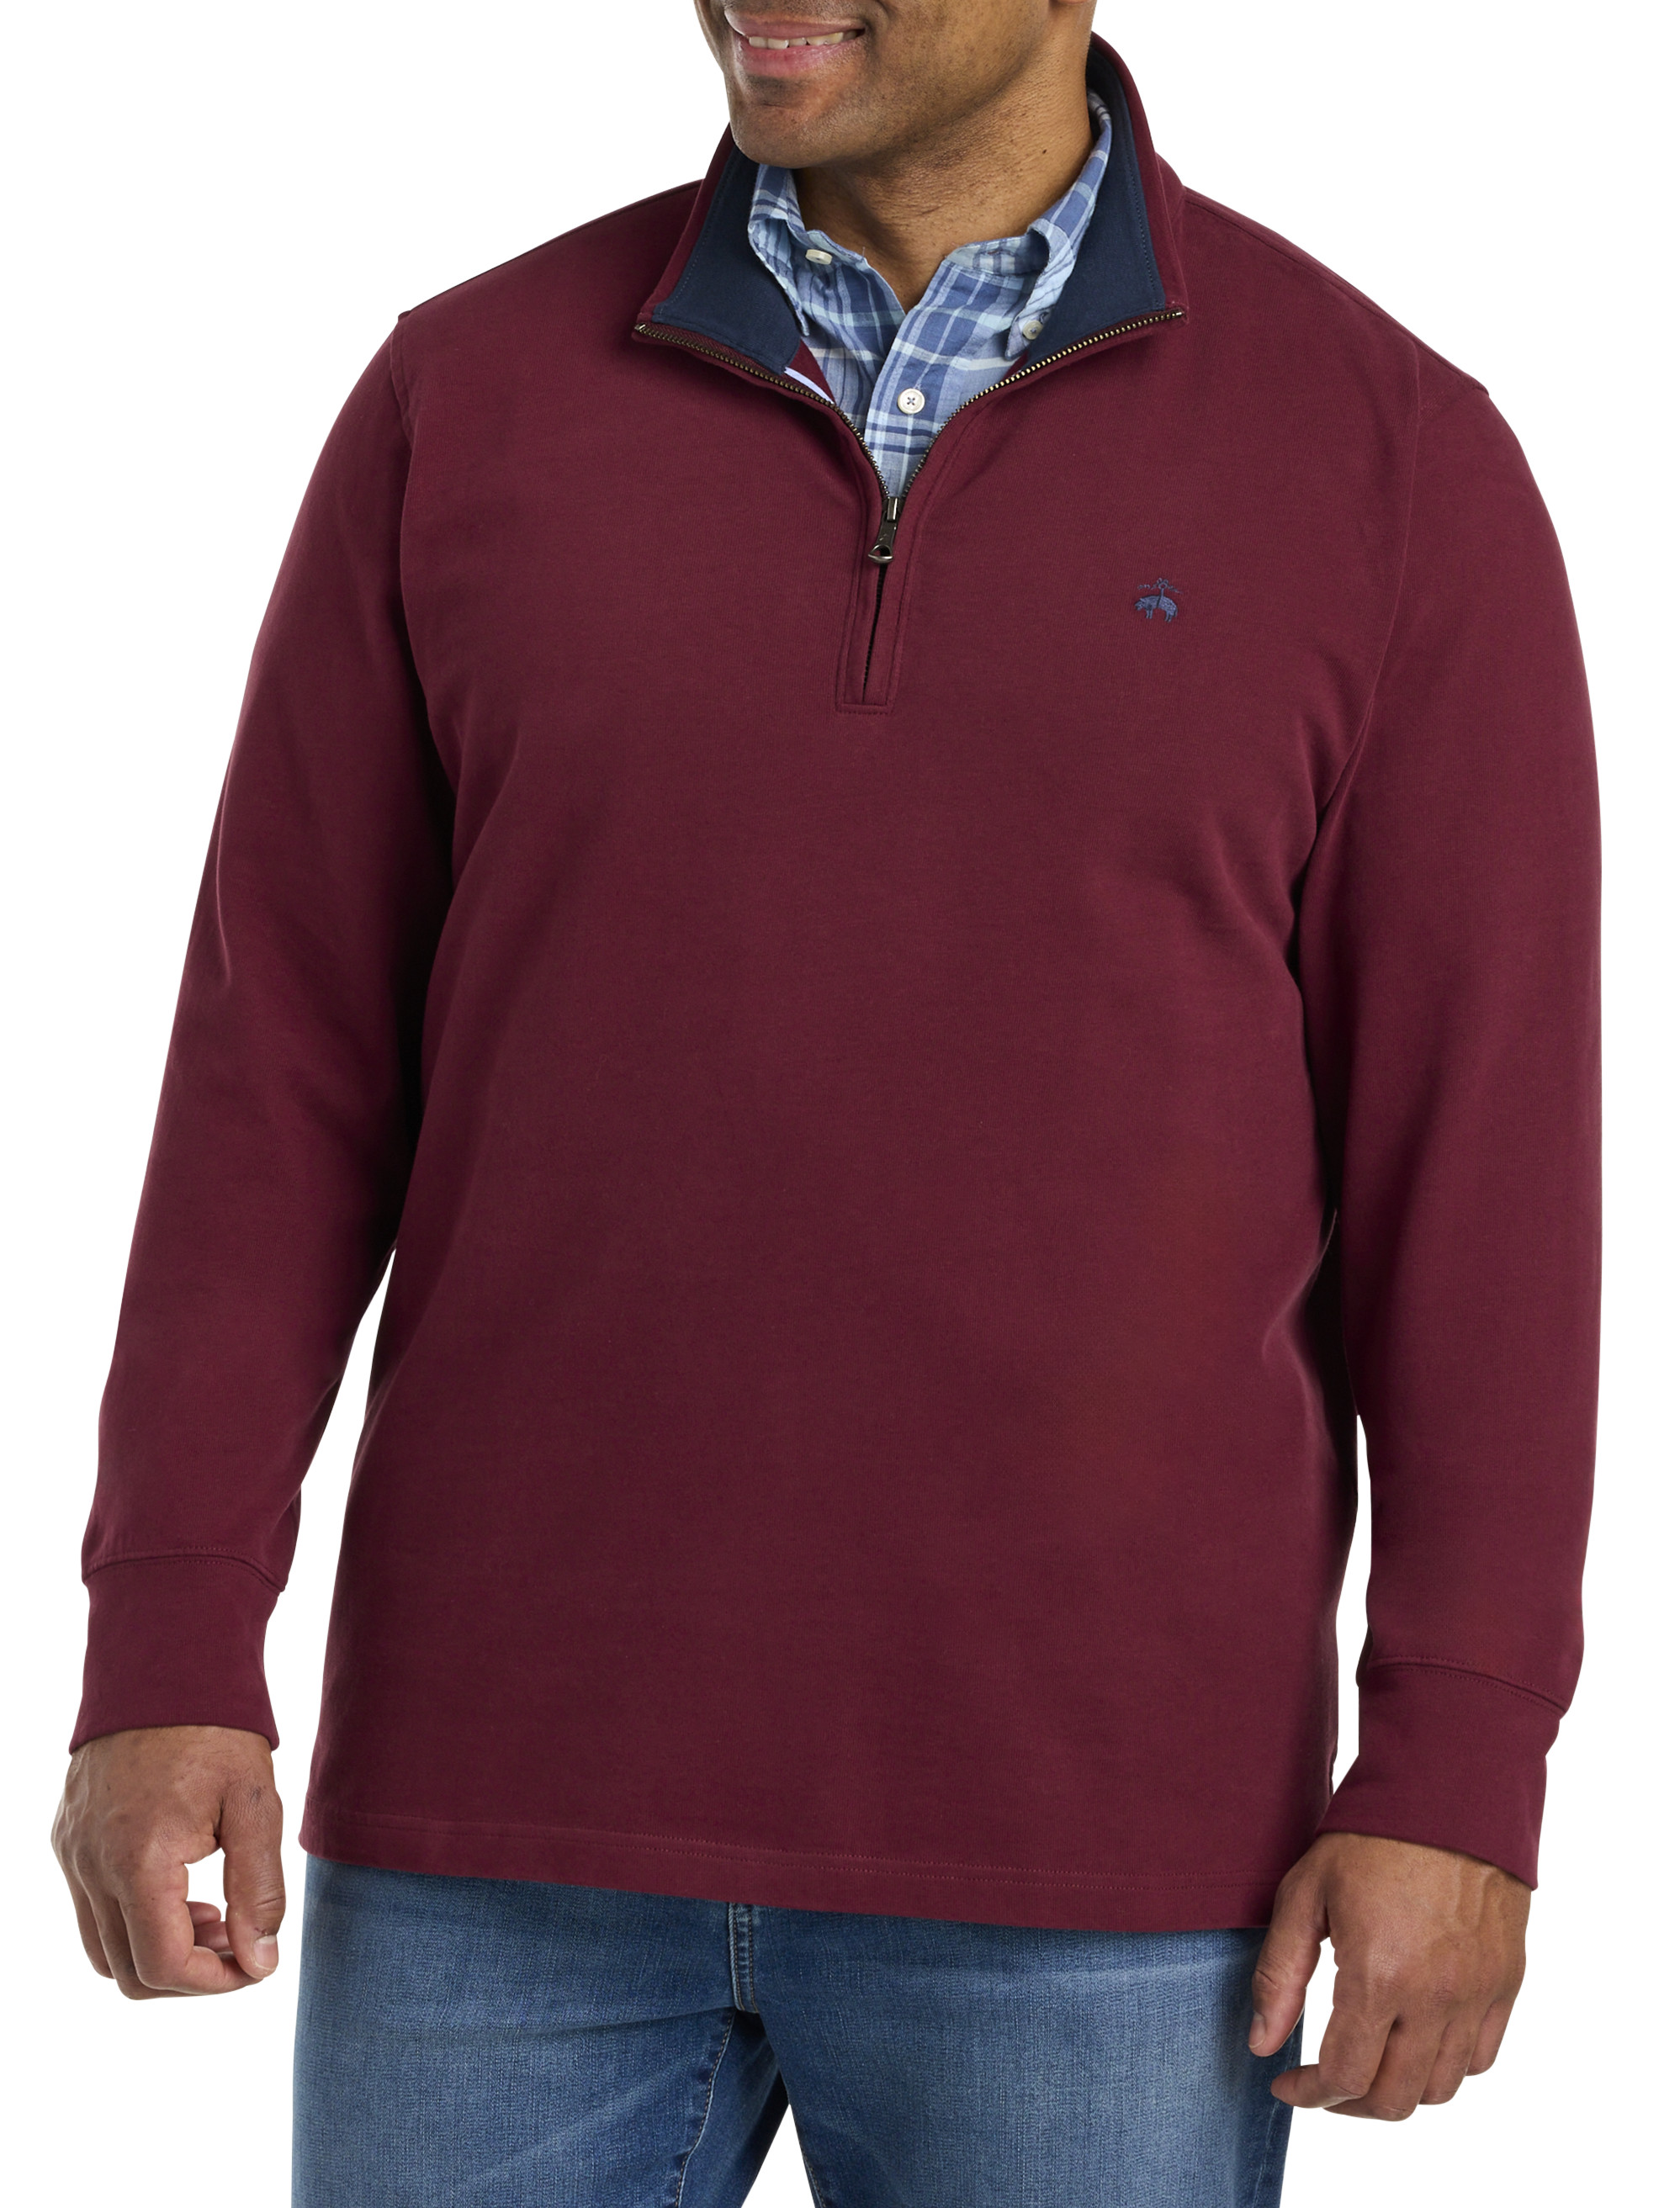 The Original Lucky Brand Pullover Sweater Crew Neck Red Wine